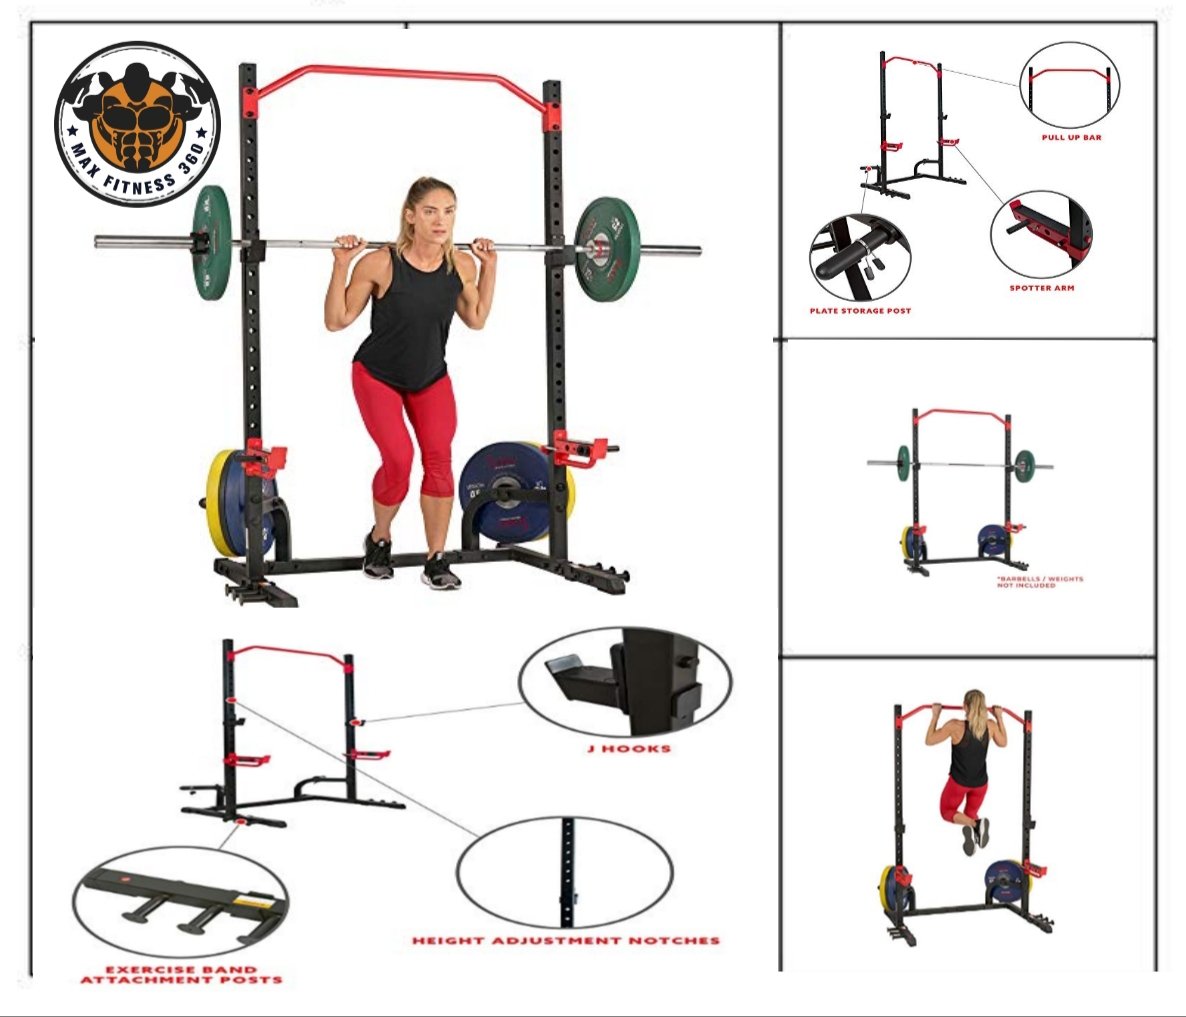 Sunny Health & Fitness Power Zone Squat Stand Rack Power Cage 
-
-
-
Contact Us to Buy
🌐 maxfitness360.com 
#accessories  #fitness  #excercise  #body #machine  #gymequipment #gym #fitness #homegym #workout #bodybuilding #fitnessmotivation #squatstand #powercage